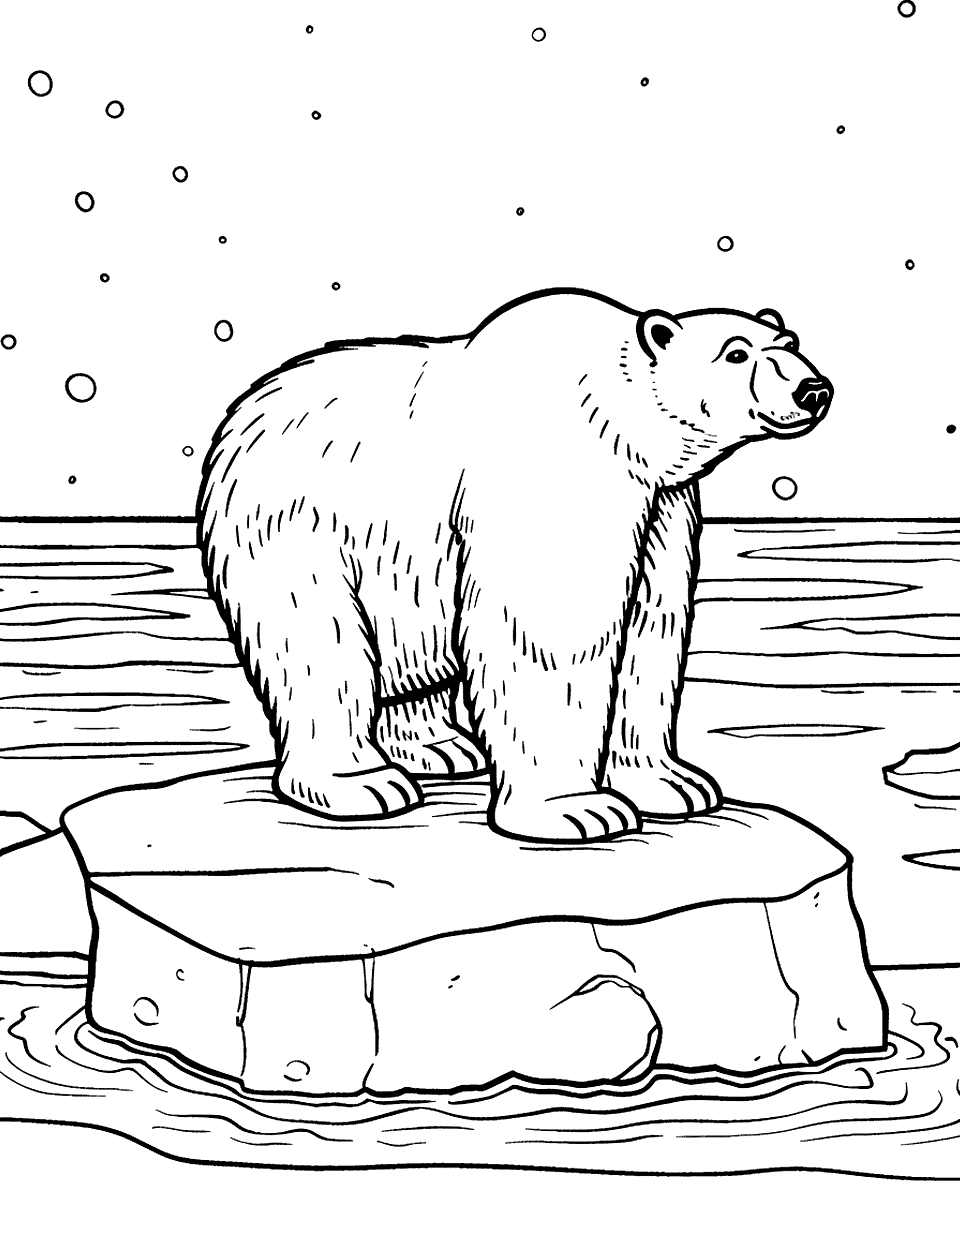 Polar Bear on Ice Floe Coloring Page - A polar bear on a large piece of floating ice.